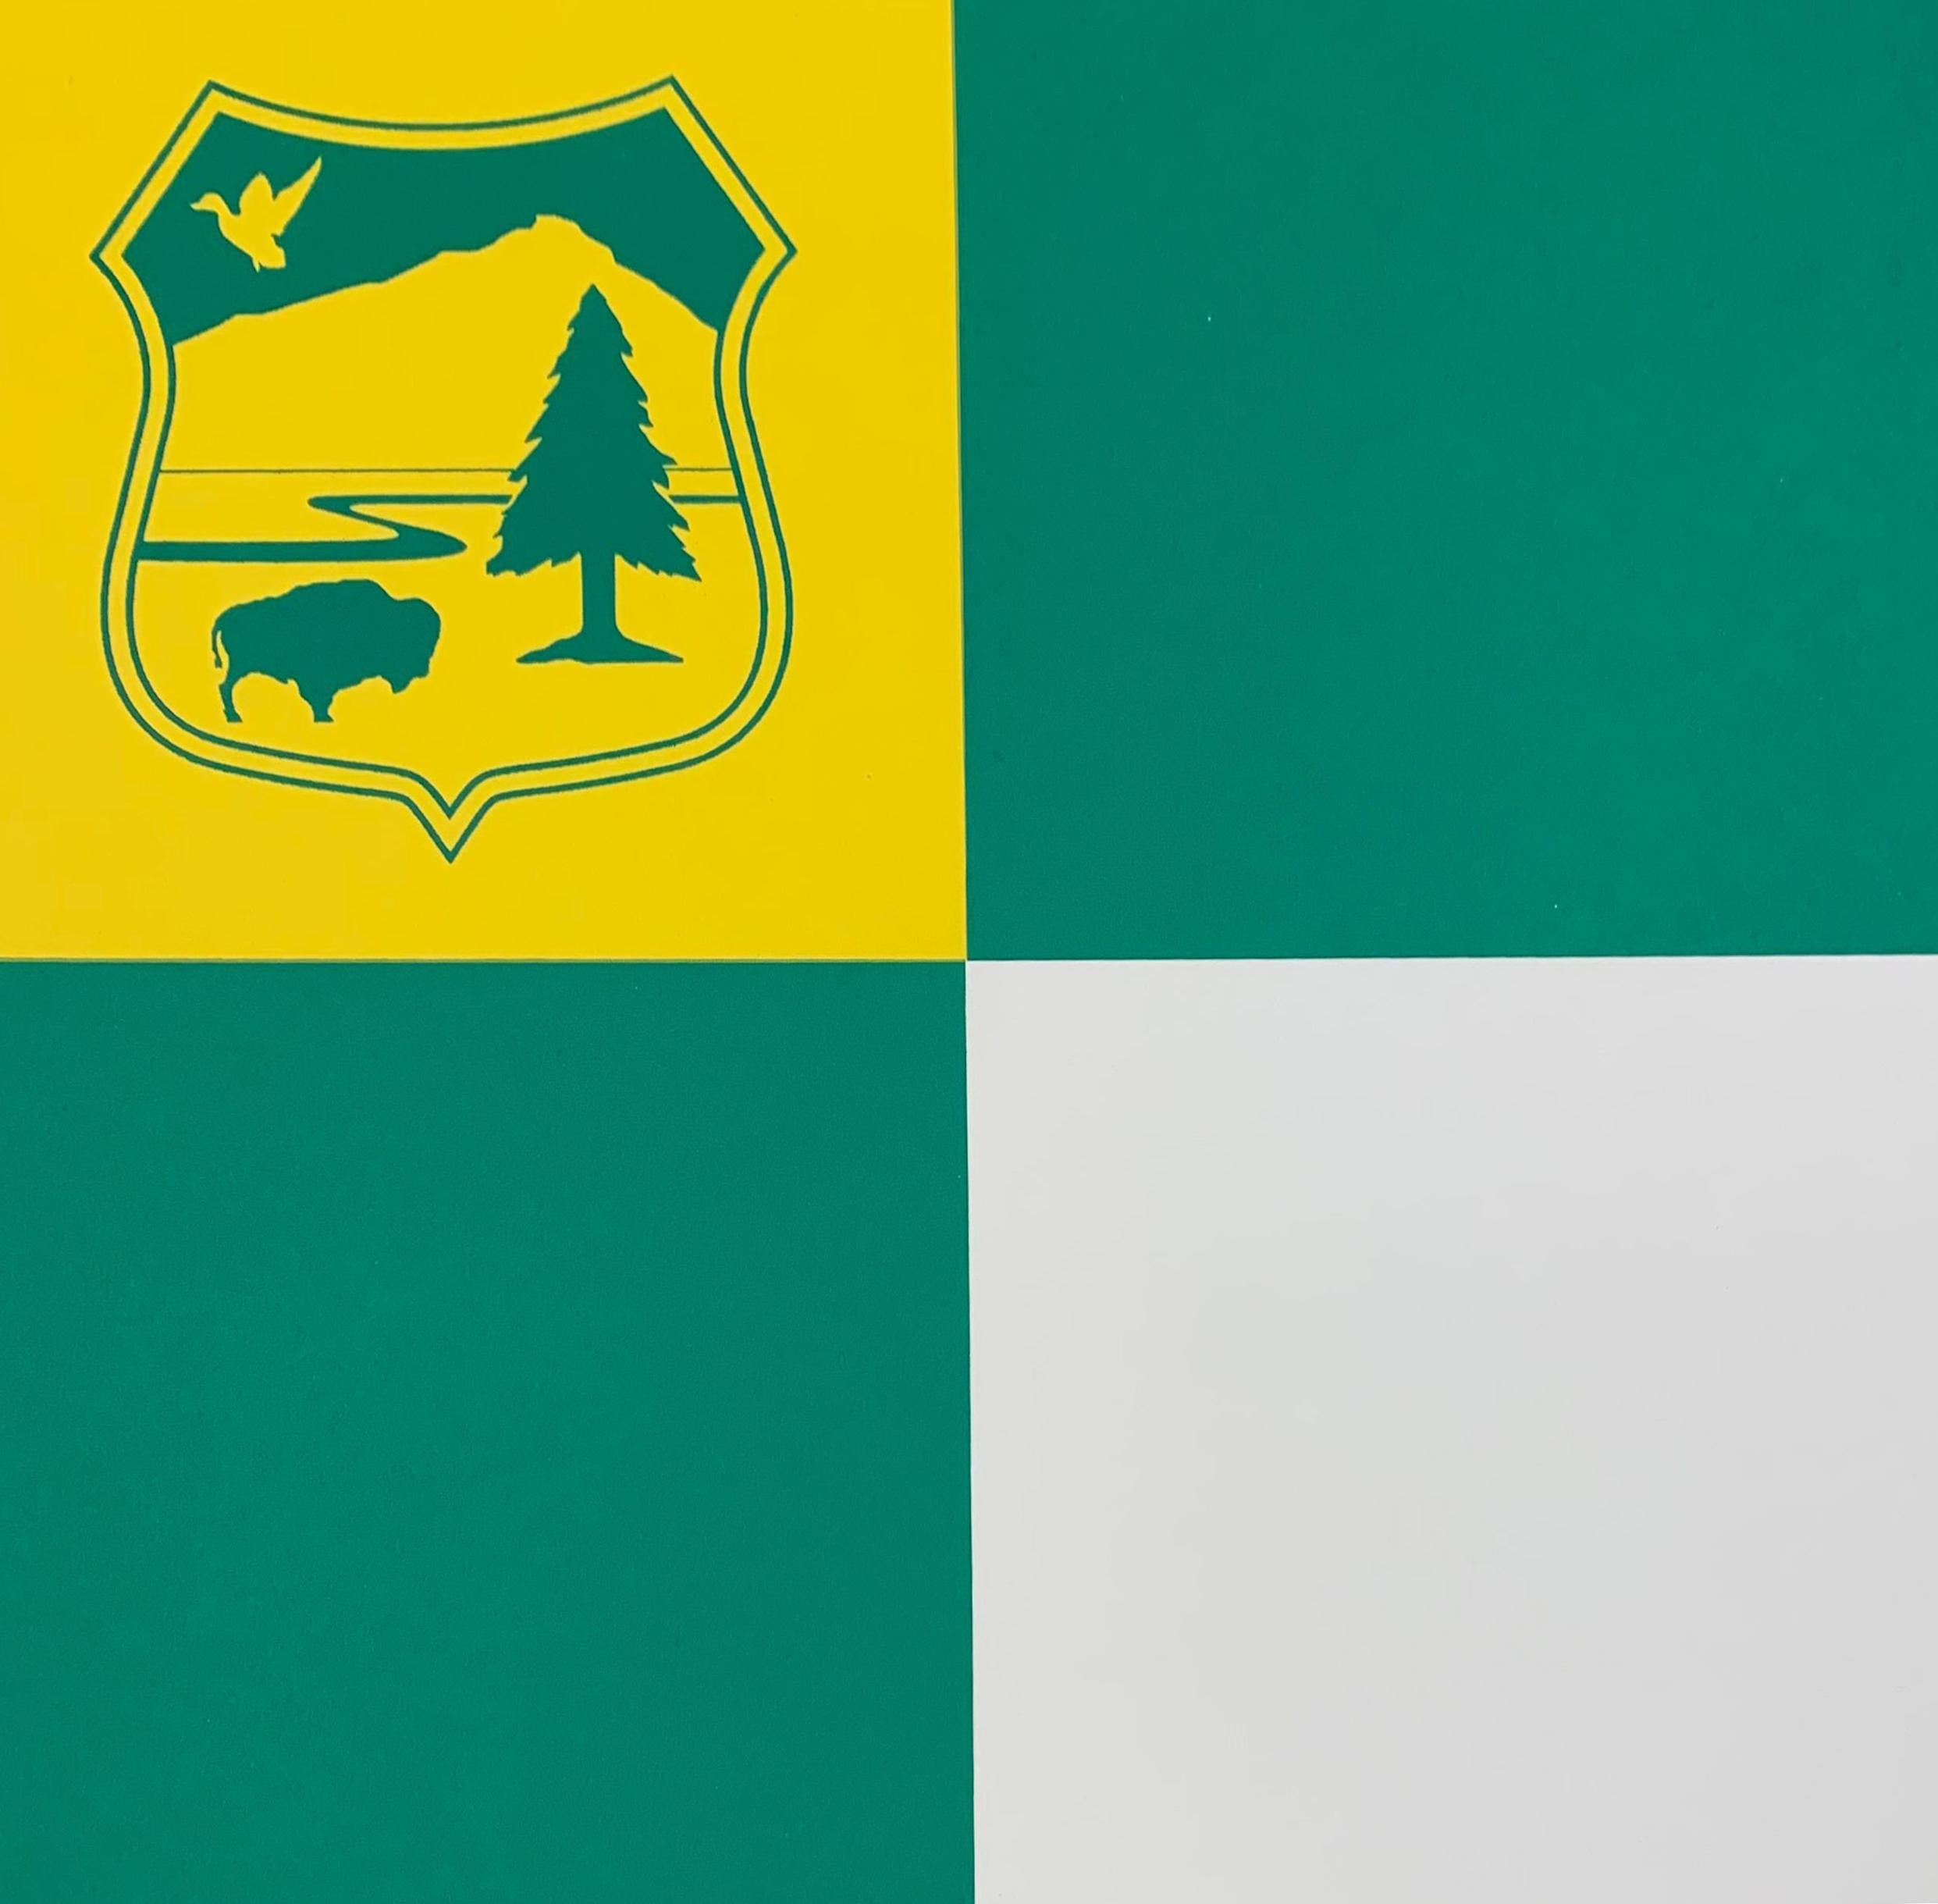 GYE US Forest Service Flag - Painting by David Buckley Borden